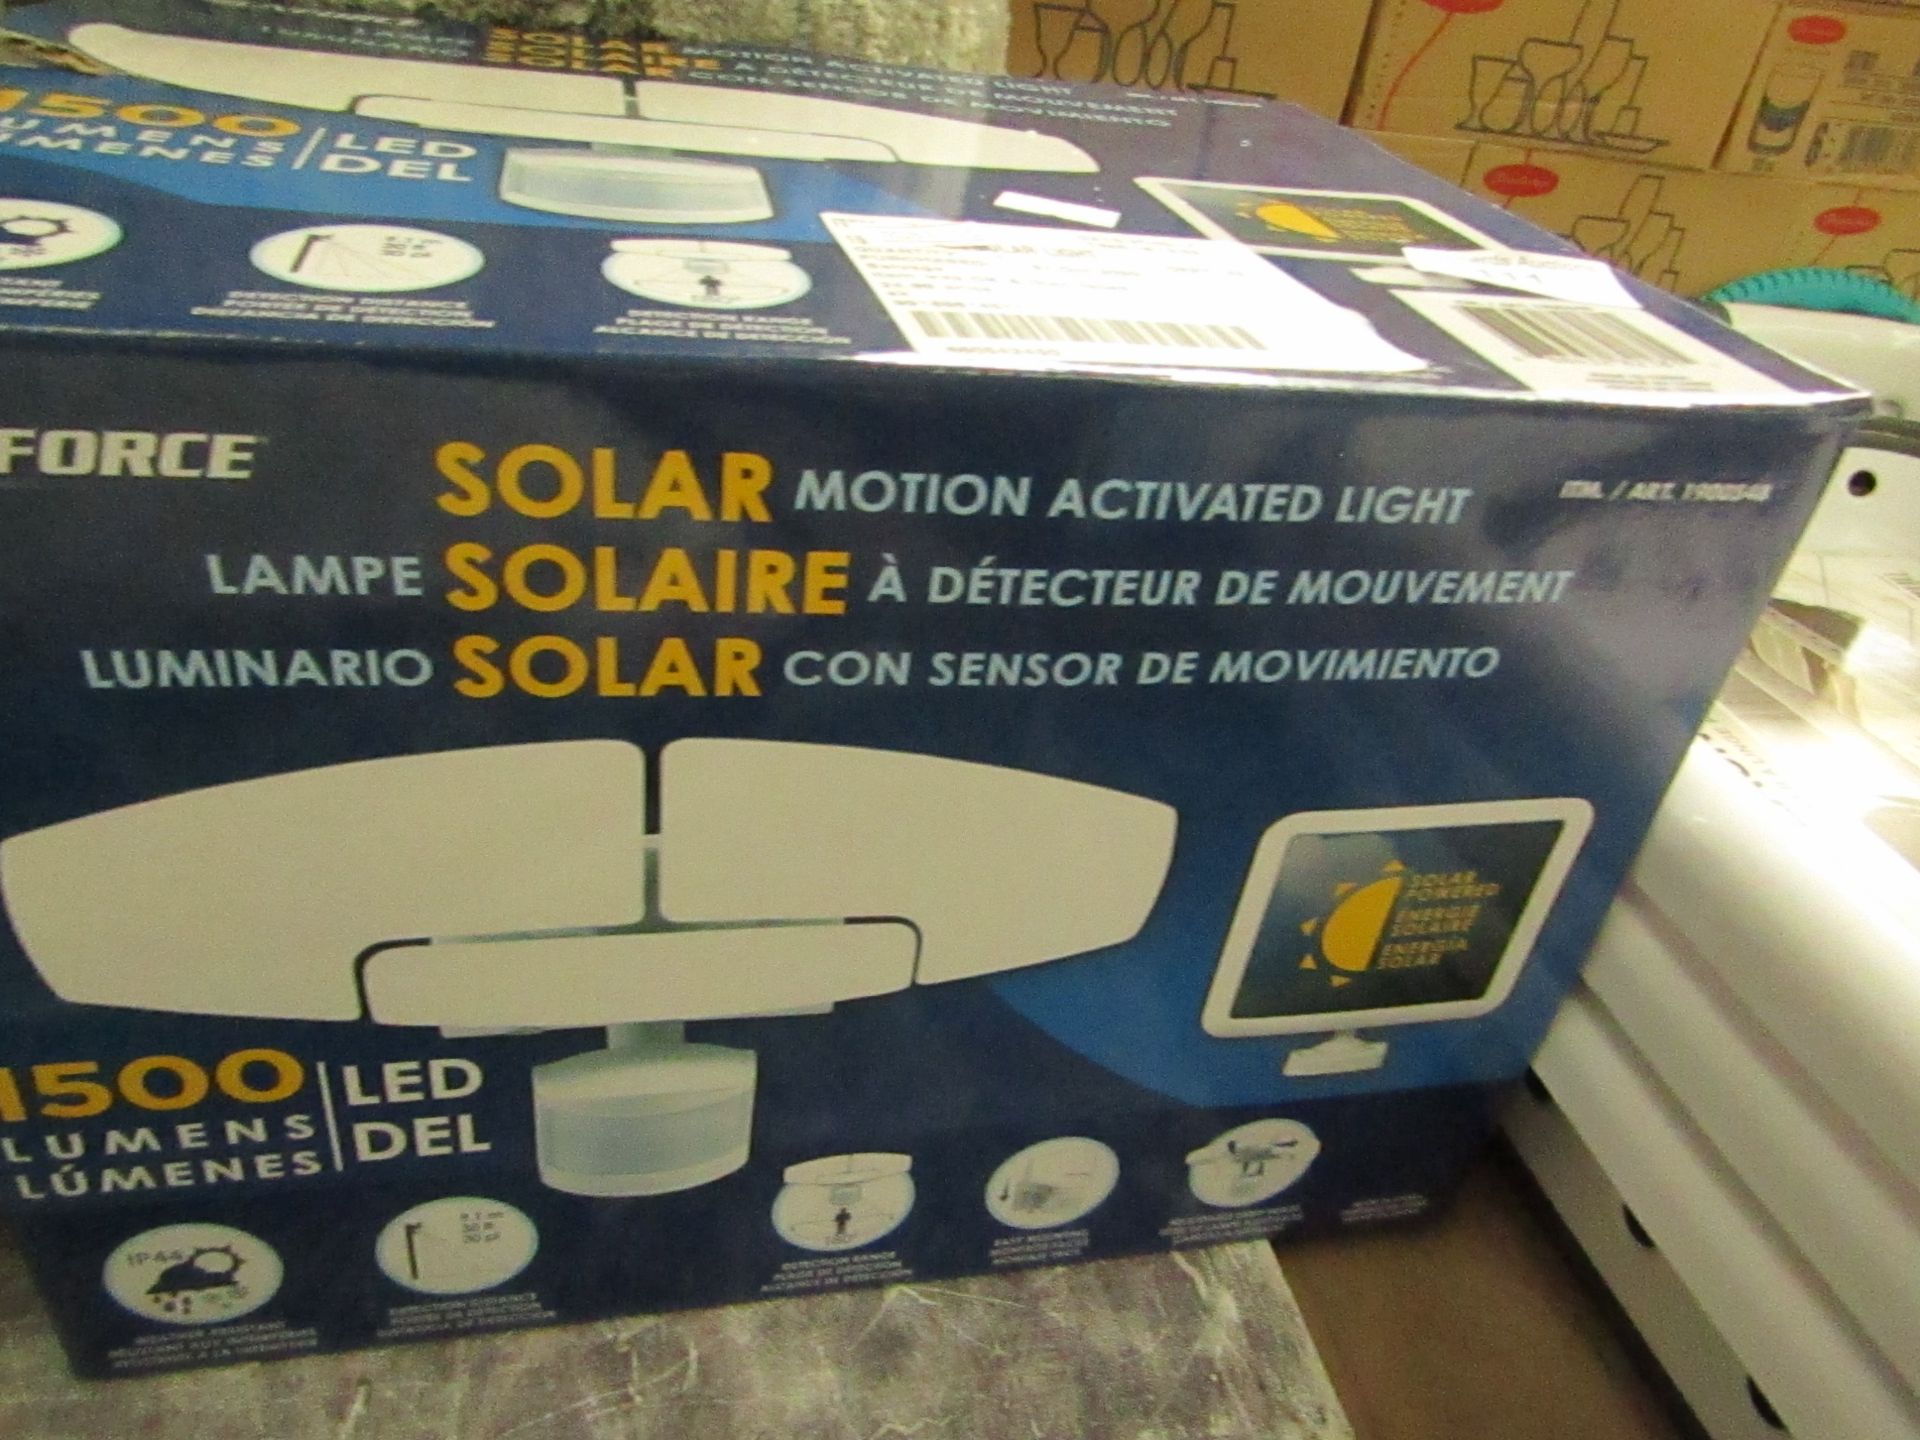 Sunforce - Solar Motion Activated Outdoor Light / 1500 Lumens - Untested & Boxed.